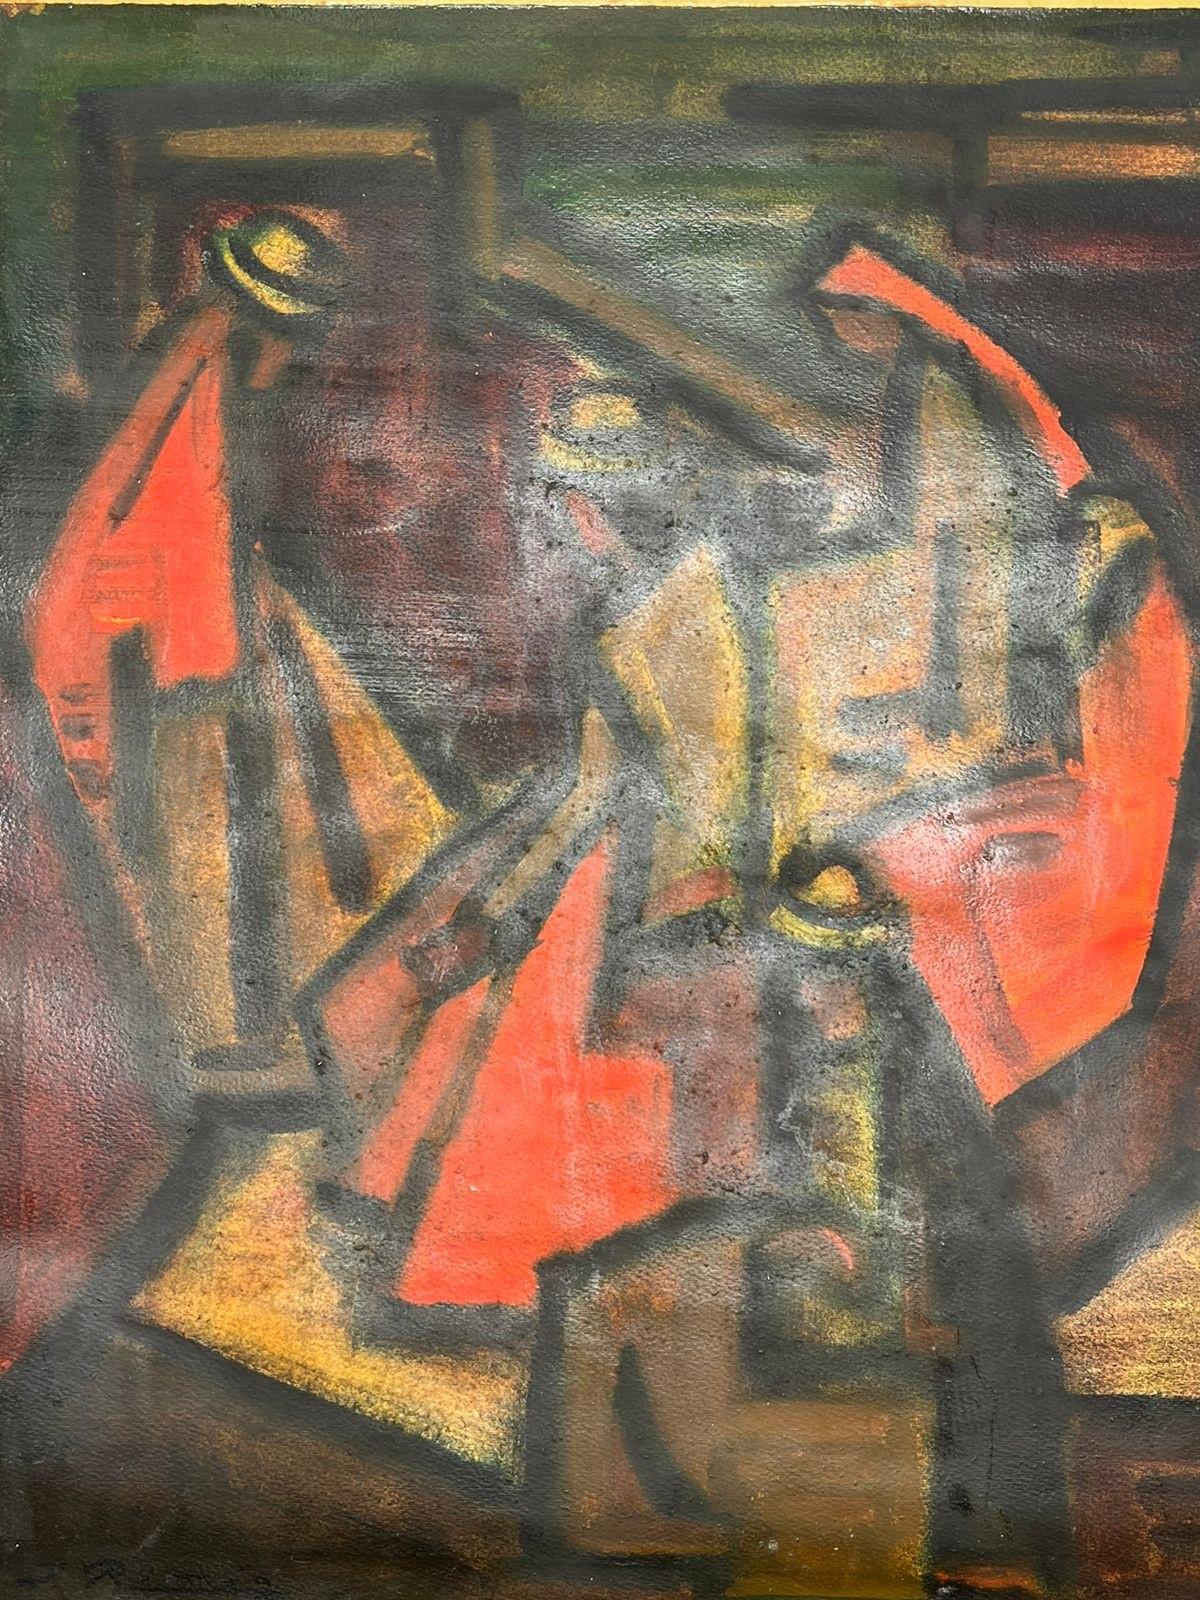 Wood Juan Rimsa  ( Argentina, 1903-1978) Abstract Painting in oil on paper signed For Sale